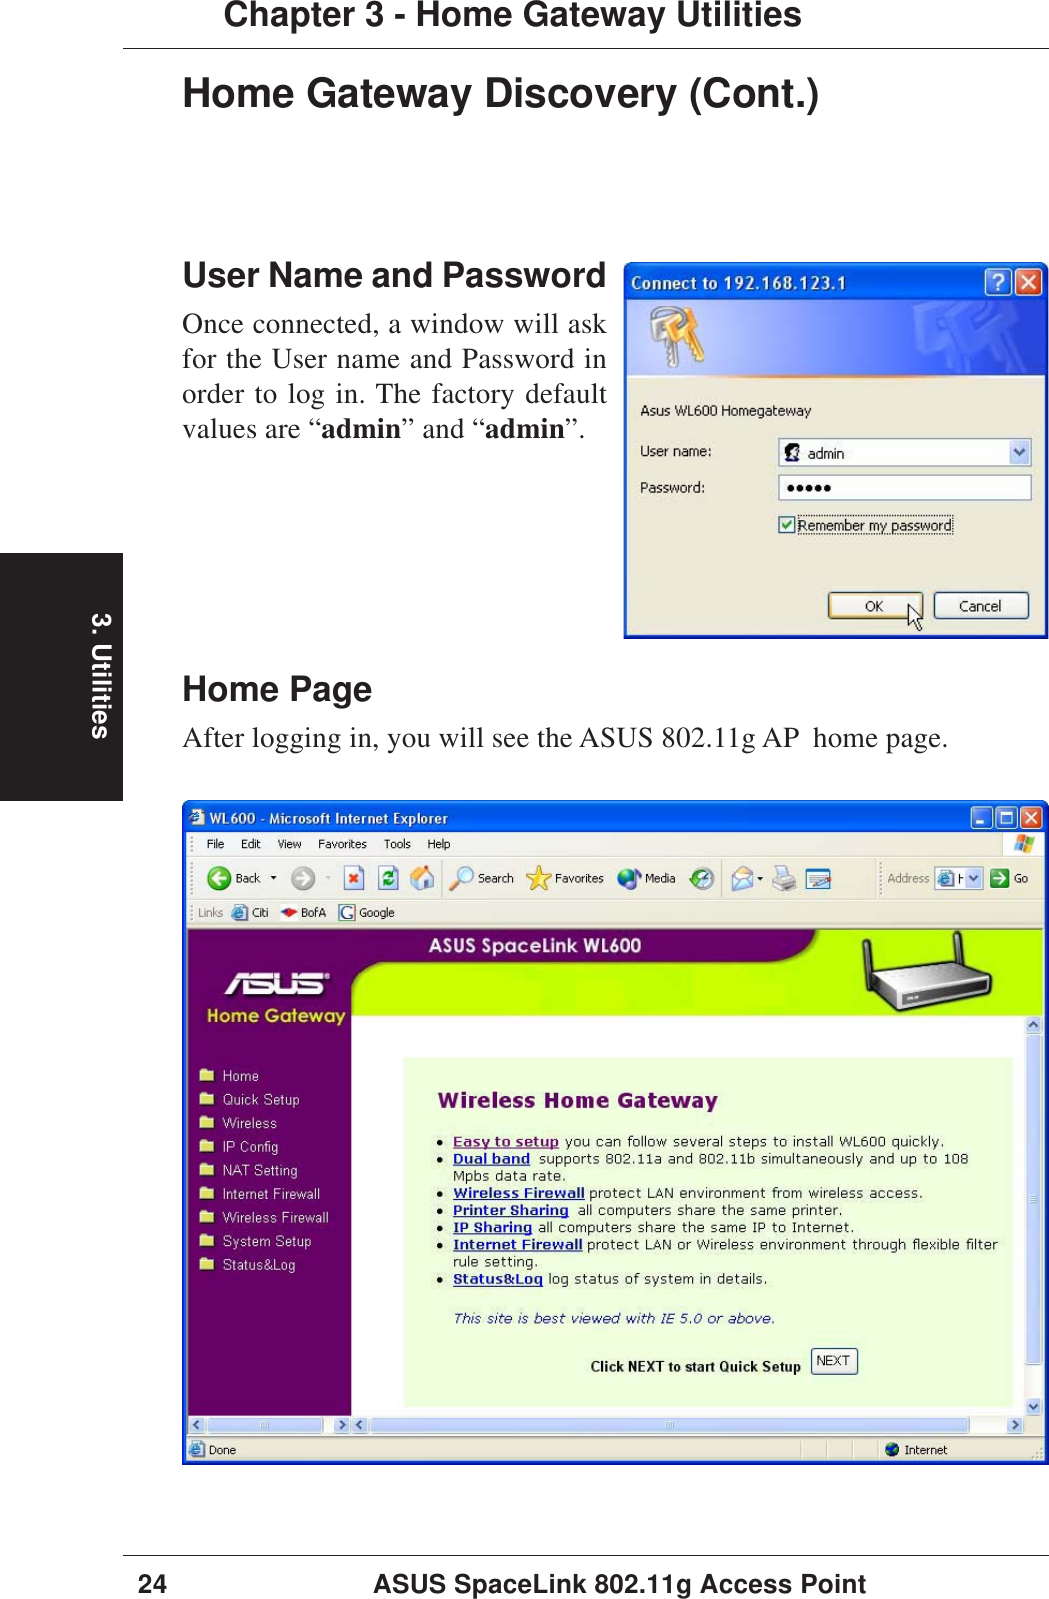 3. Utilities24 ASUS SpaceLink 802.11g Access PointChapter 3 - Home Gateway UtilitiesHome PageAfter logging in, you will see the ASUS 802.11g AP  home page.User Name and PasswordOnce connected, a window will askfor the User name and Password inorder to log in. The factory defaultvalues are “admin” and “admin”.Home Gateway Discovery (Cont.)